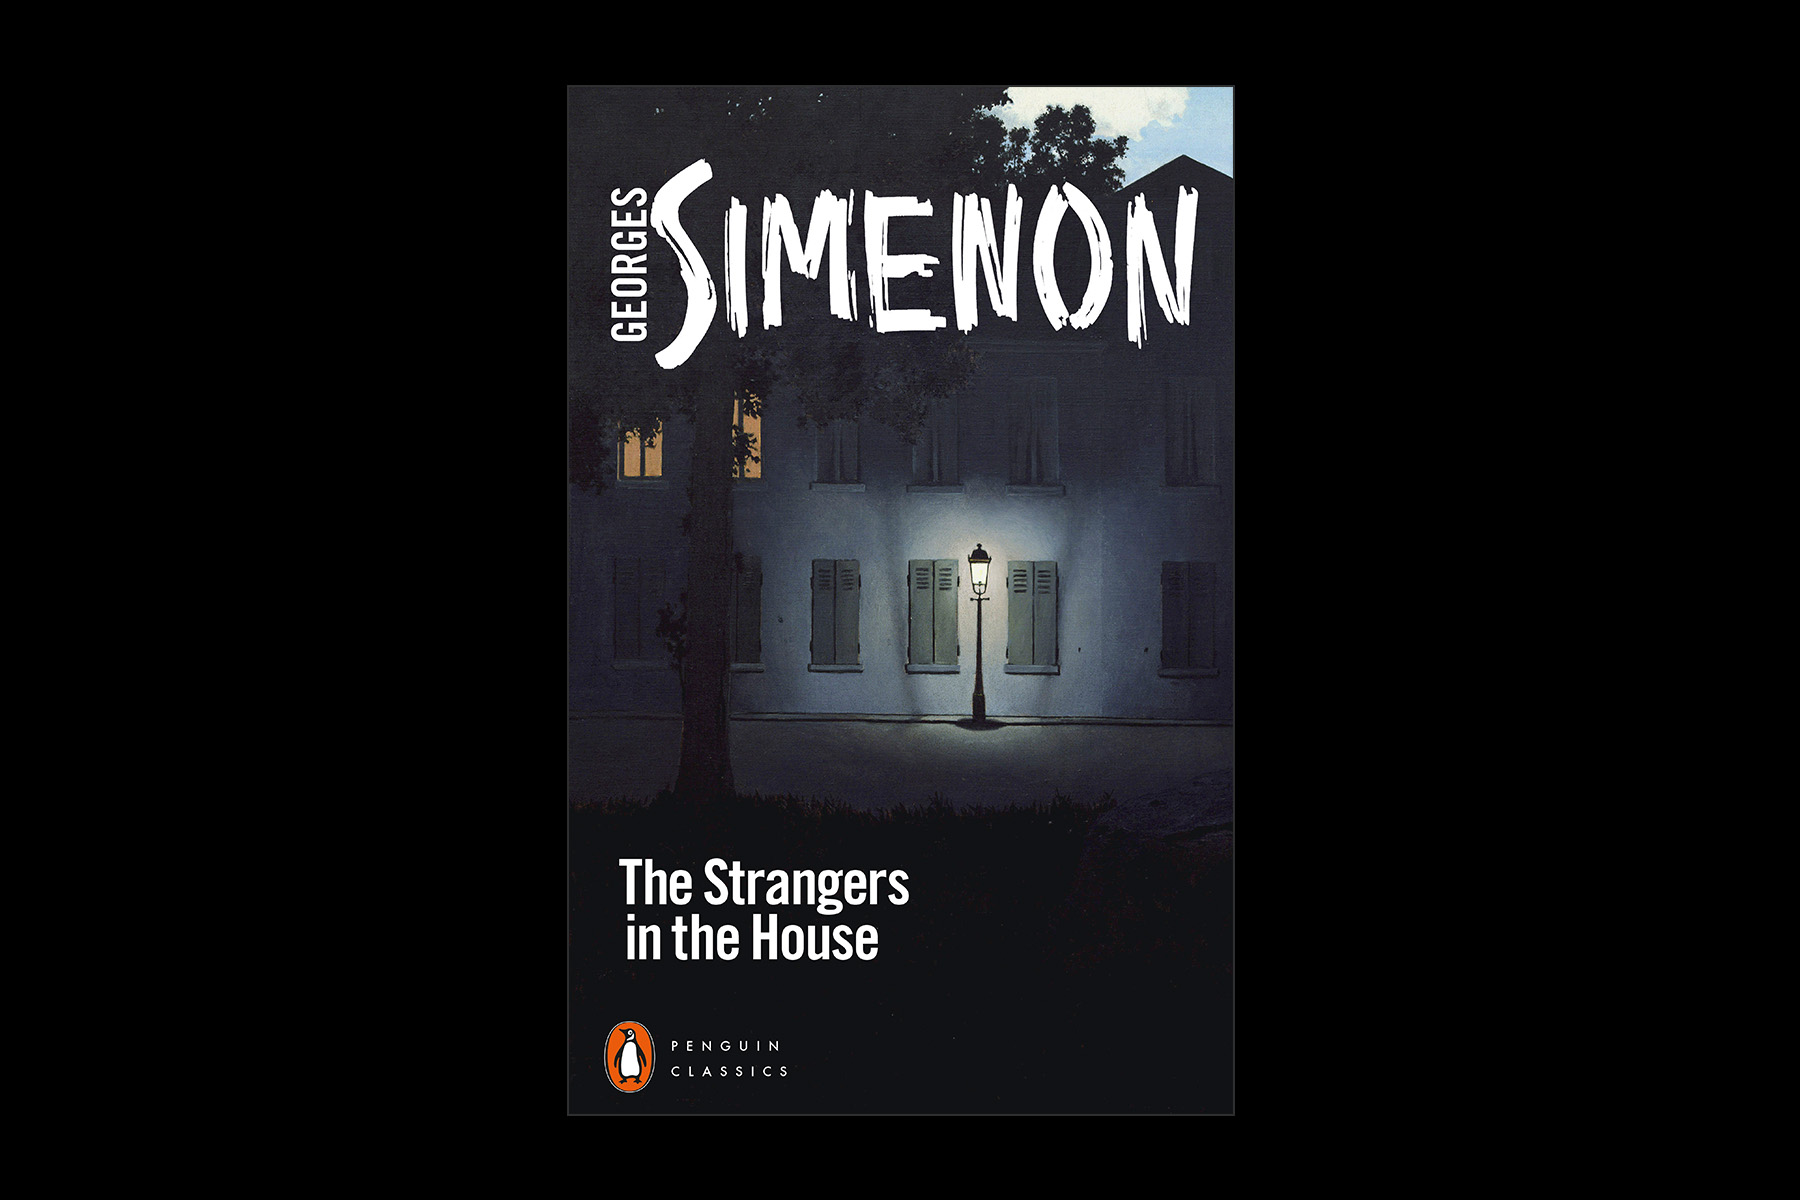 The cover of Georges Simenon's The Strangers in the House against a black background